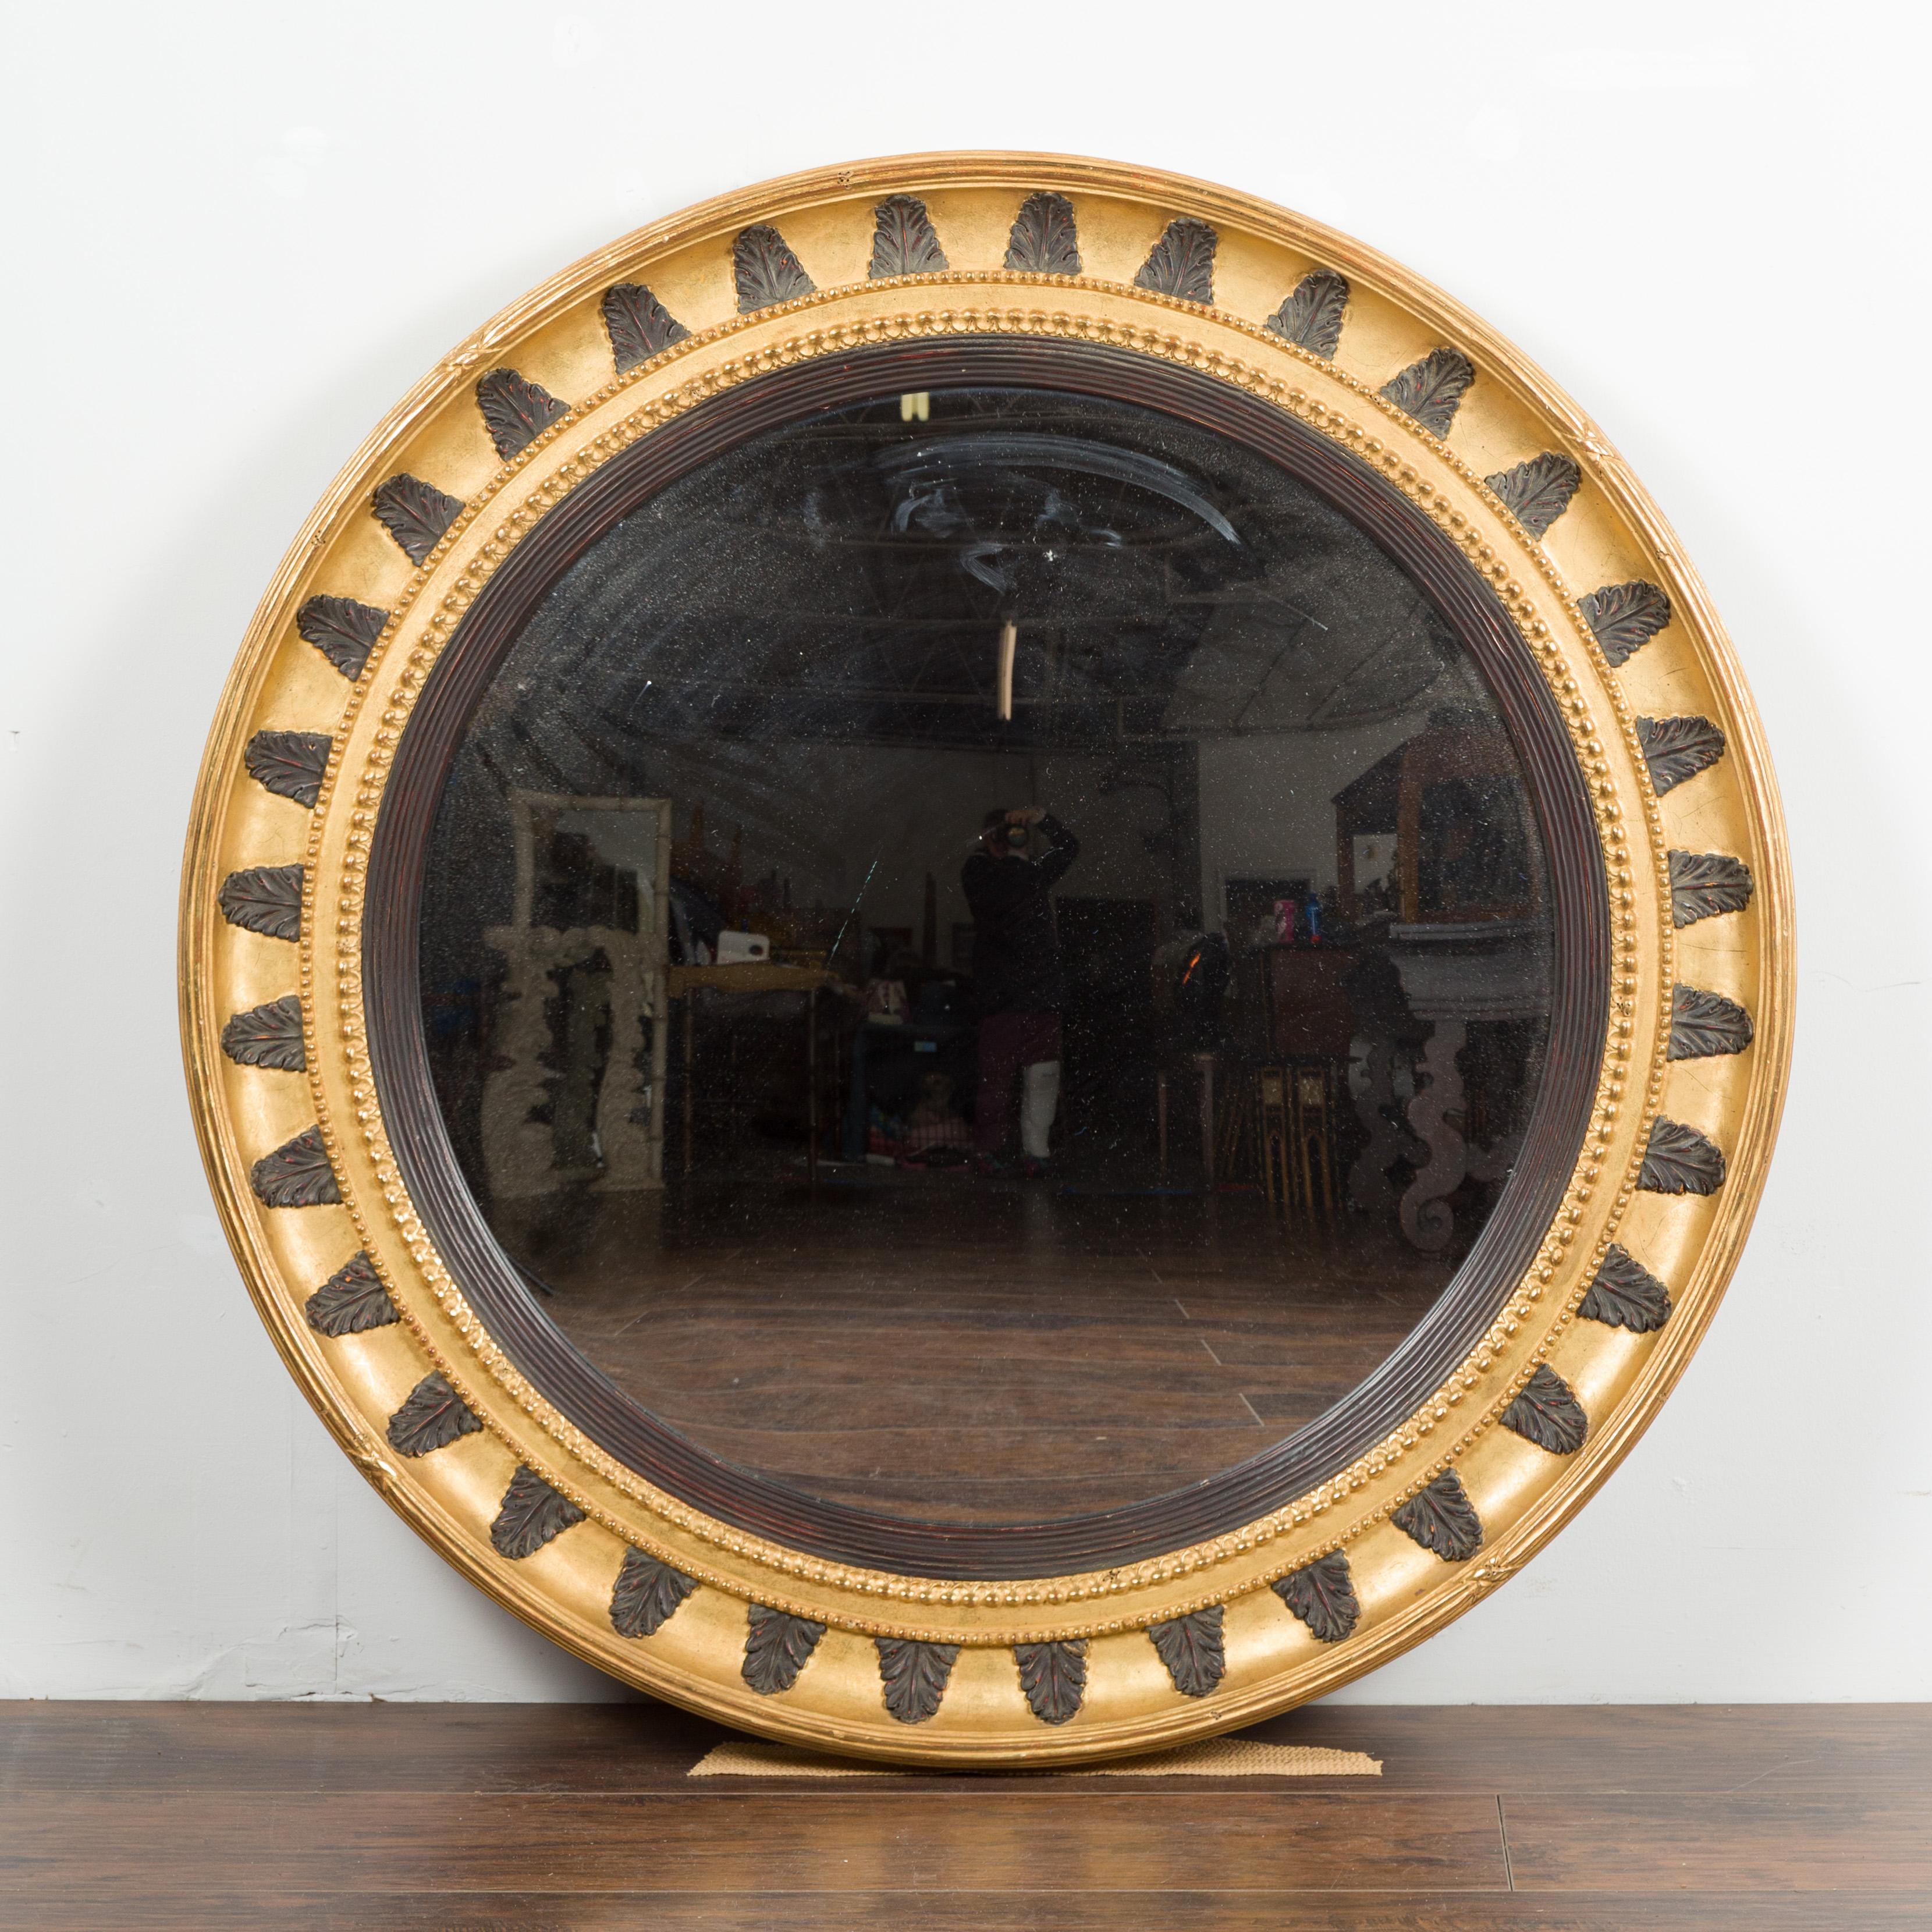 Carved English Midcentury Bullseye Convex Mirror with Gilded Frame and Ebonized Leaves